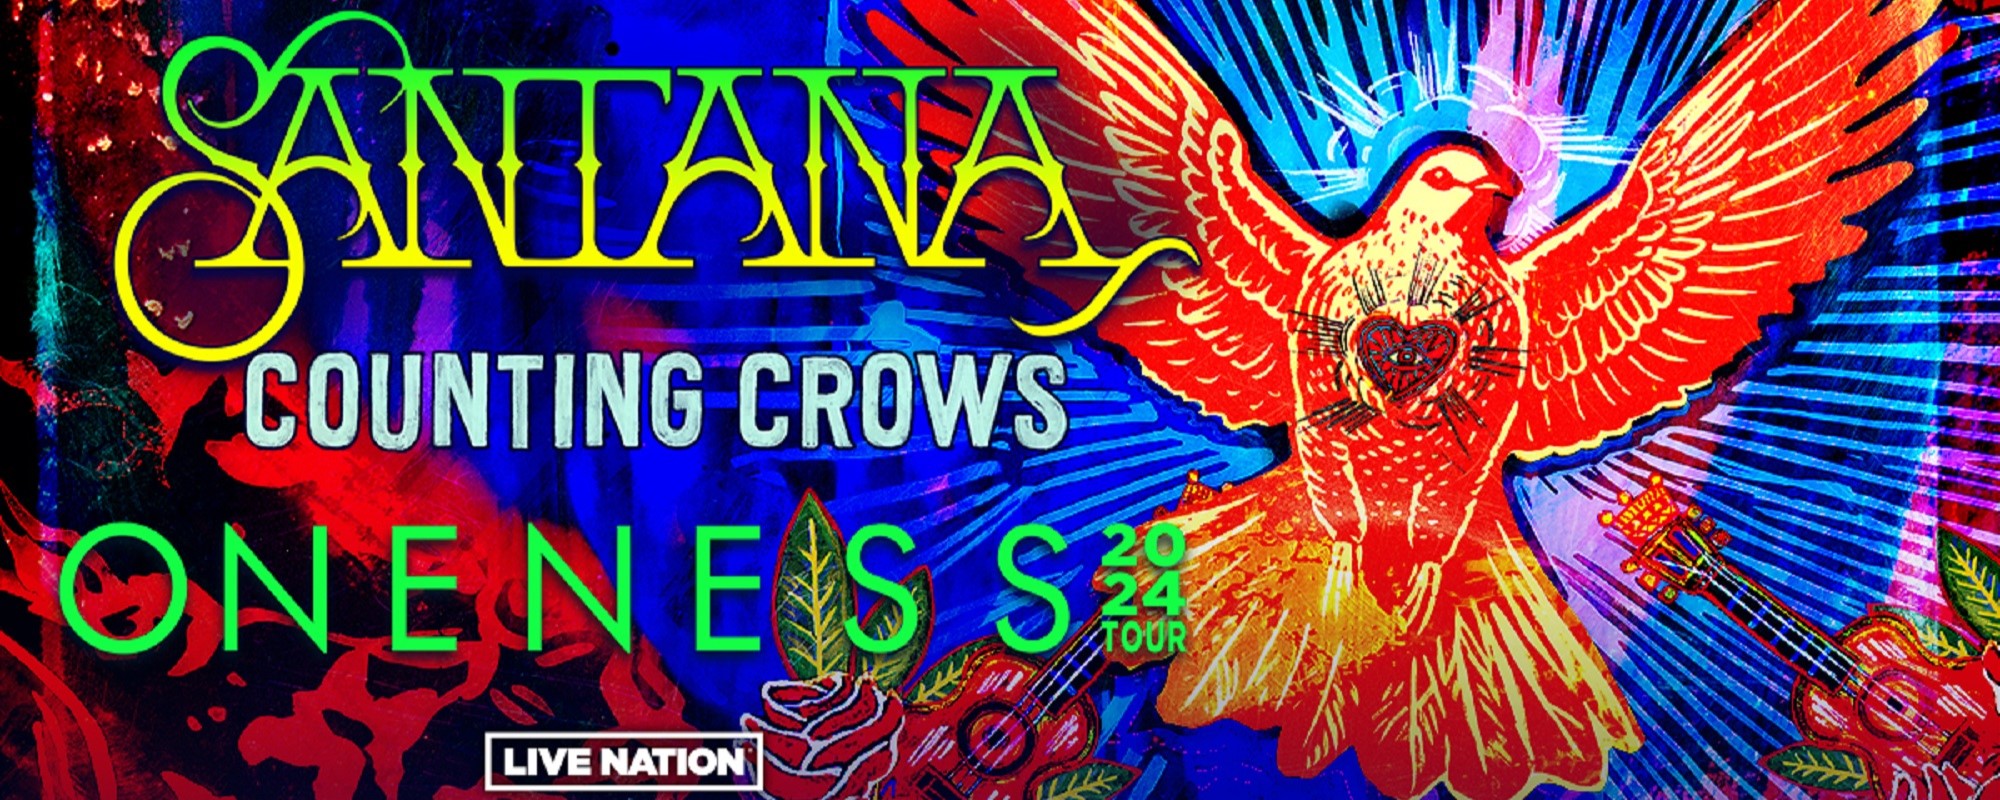 Santana and Counting Crows Announce Oneness Tour in 2024